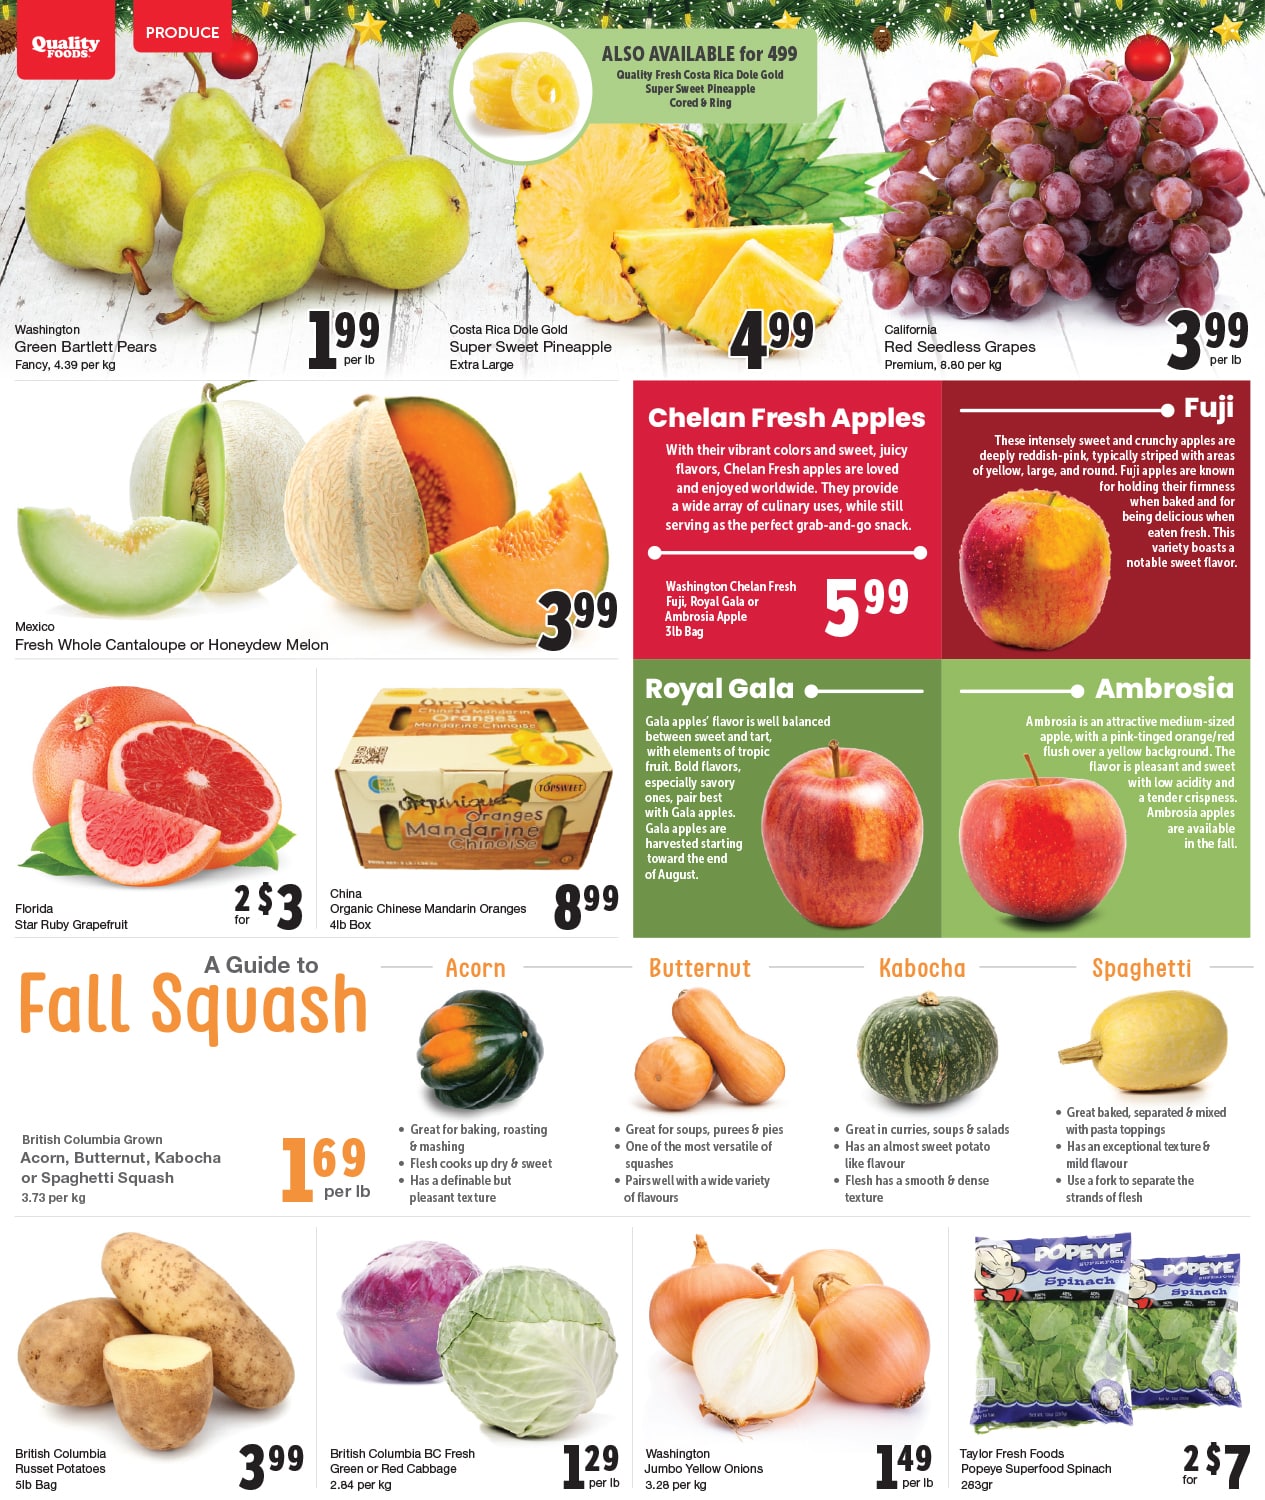 Quality Foods - Weekly Flyer Specials - Page 2